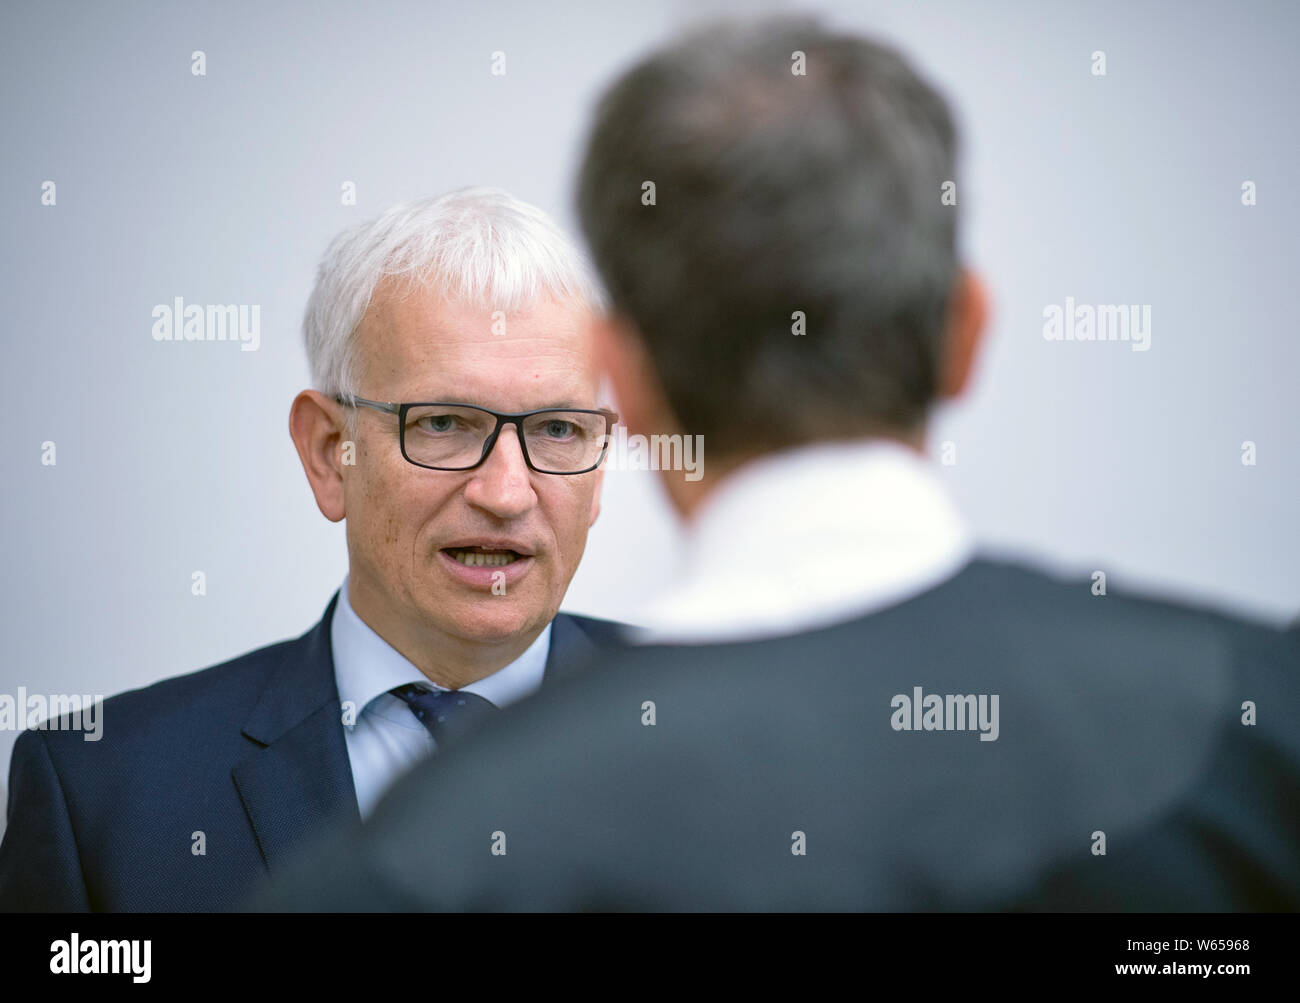 31 July 2019, North Rhine-Westphalia, Münster: Jürgen Resch (l), Federal Managing Director of Deutsche Umwelthilfe, and lawyer Remo Klinger talk to each other before the trial begins. The Higher Administrative Court of North Rhine-Westphalia is hearing the action brought by Deutsche Umwelthilfe (German Environmental Aid) against the city of Aachen for the continuation of the Cologne district government's air pollution control plans. The aim is to take measures to ensure that the limit values for nitrogen dioxide are complied with as quickly as possible. Photo: Guido Kirchner/dpa Stock Photo